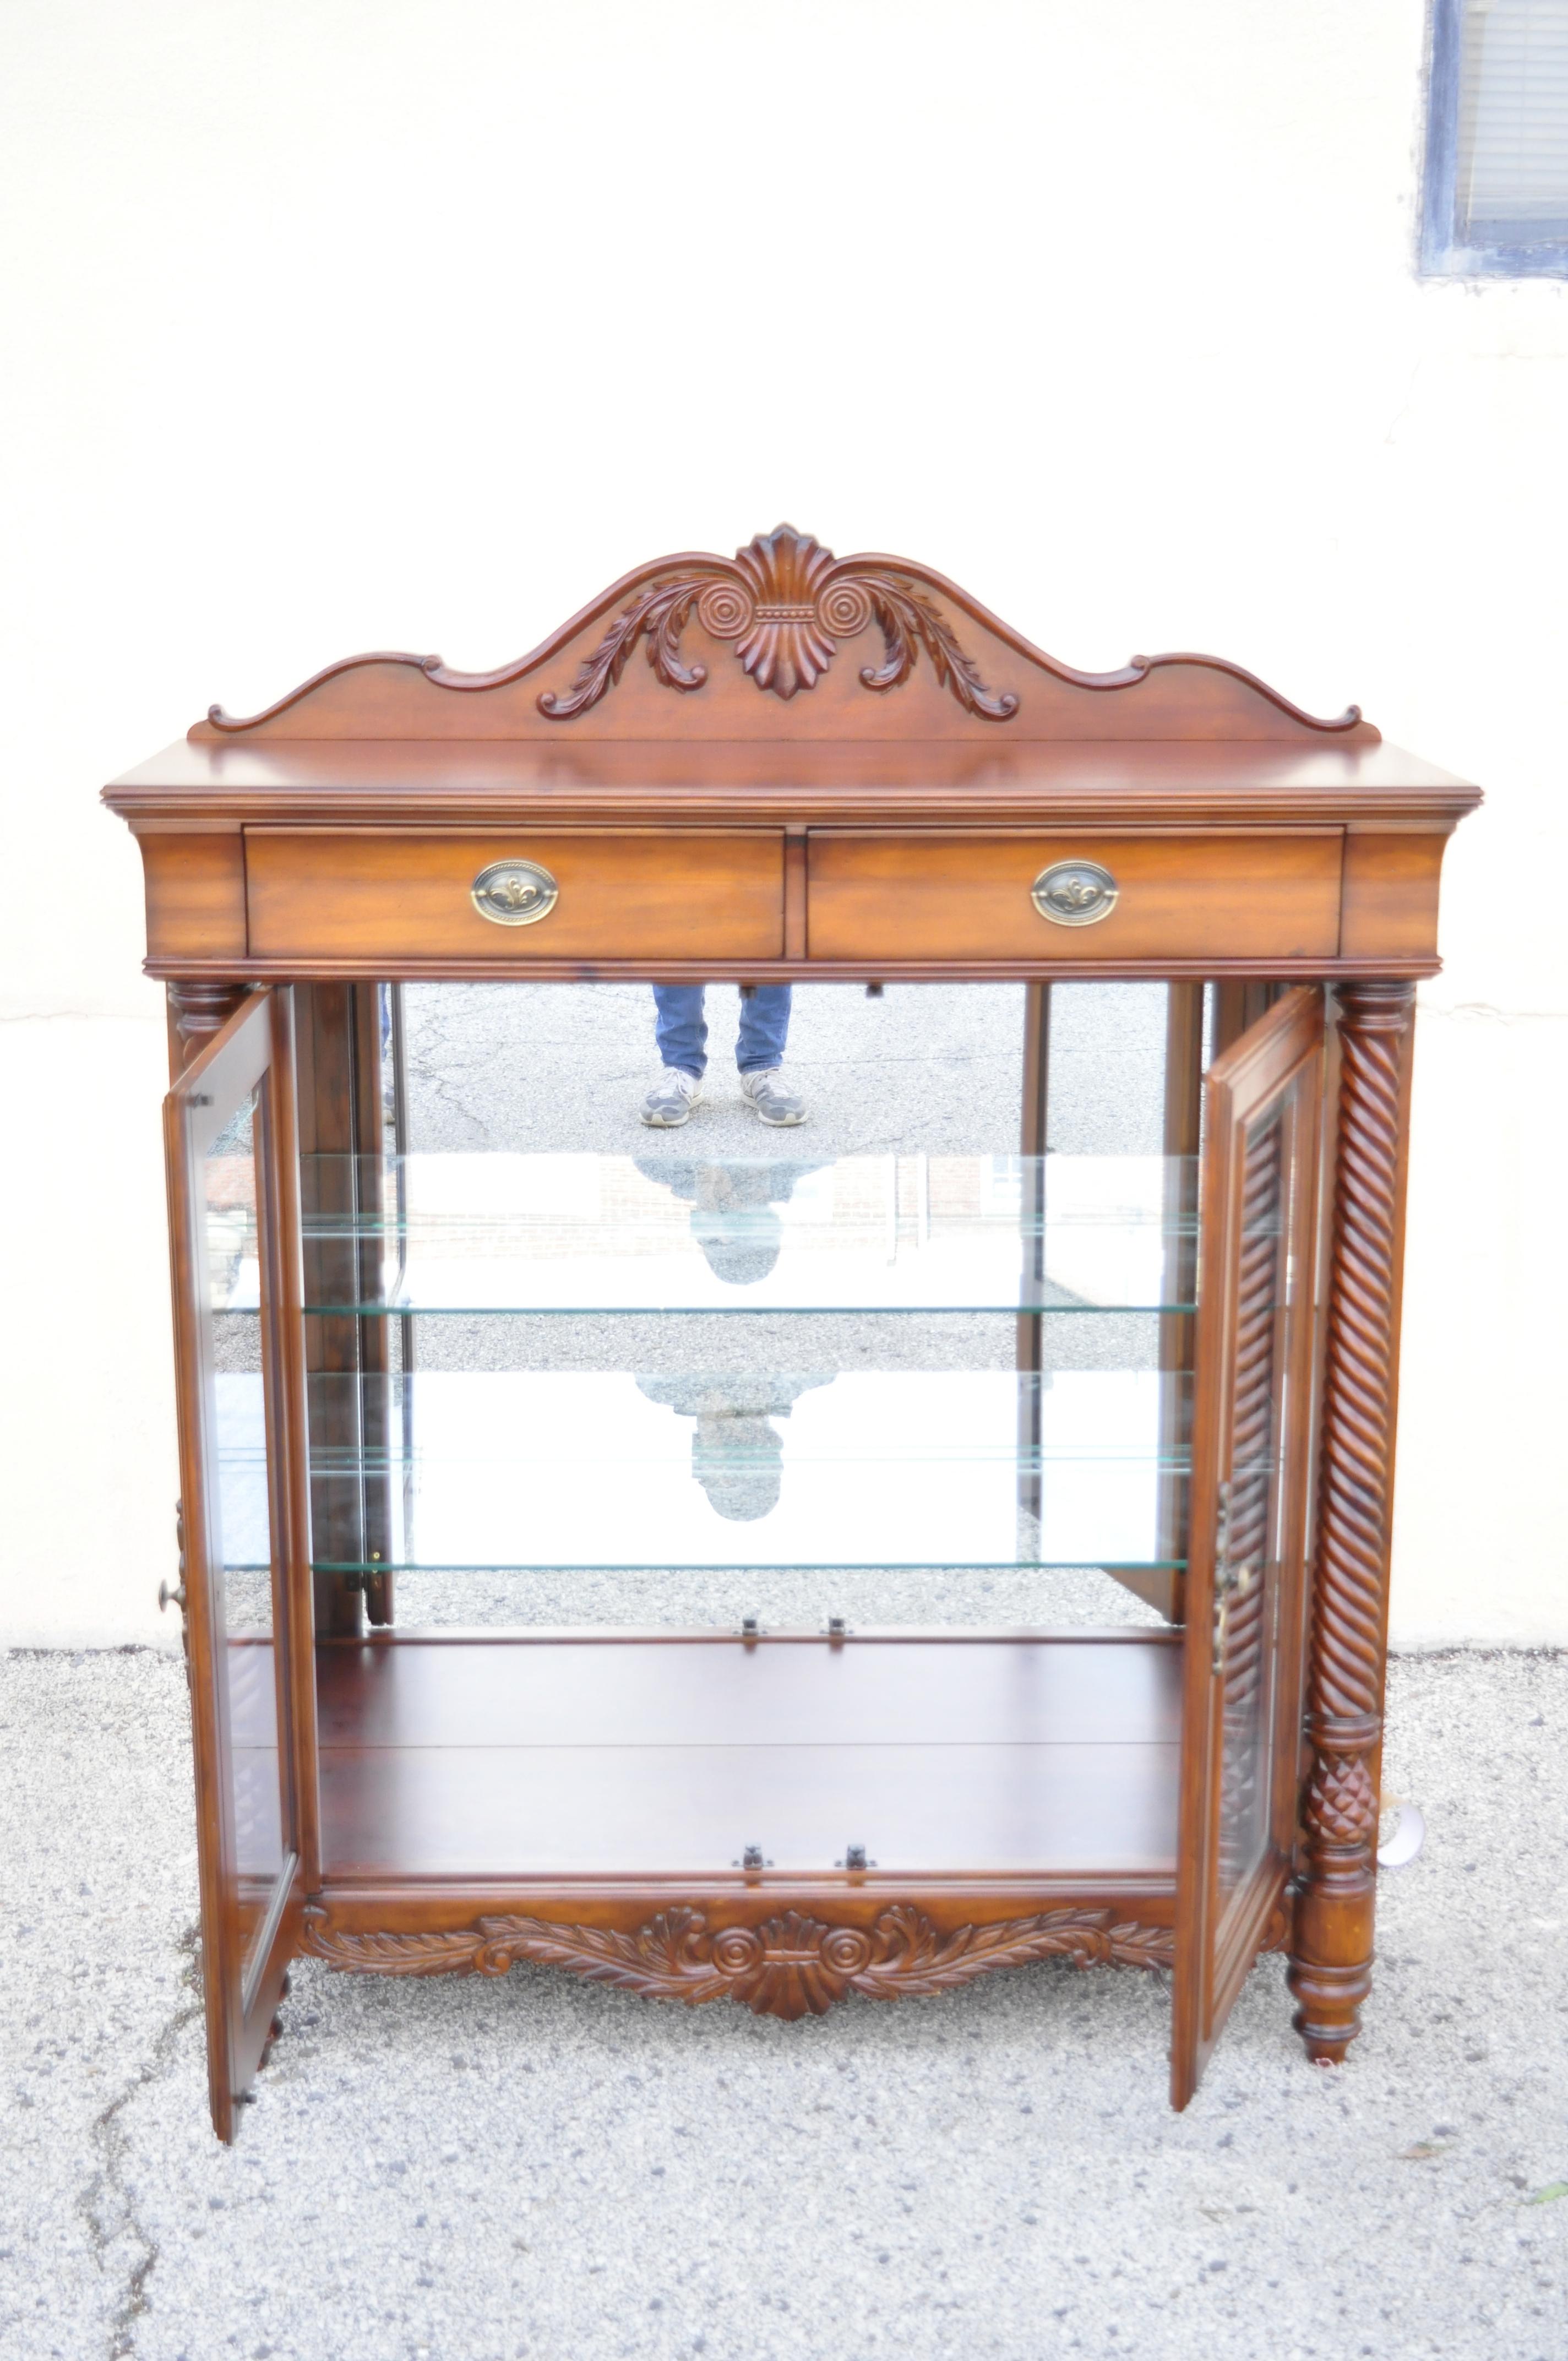 Wynwood Flex steel empire carved cherry wood glass display curio china cabinet. Item features carved wood backsplash, spiral carved columns, beautiful wood grain, nicely carved details, lighted interior, original label, 2 drawers, 2 adjustable glass